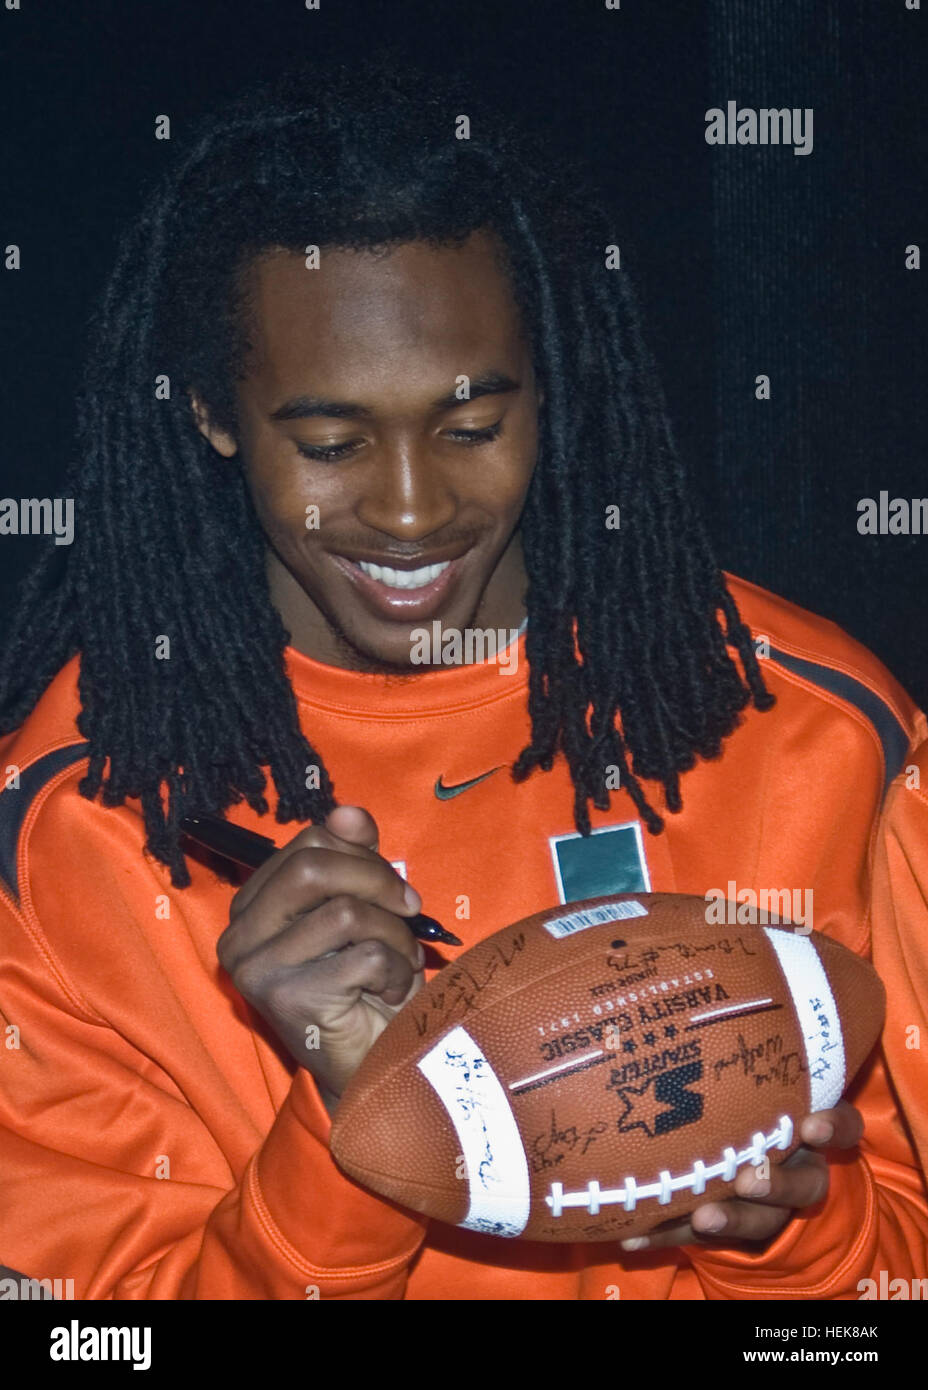 FORT BLISS, Texas (December 27, 2010) A University of Miami football player signs a football at Freedom Crossing at Fort Bliss, the post's new post exchange complex, Dec. 27. While both the Hurricanes and University of Notre Dame football players were poised to formally visit Bliss the following day, the Atlantic Coast Conference member school came early to mingle with Army families as part of their Sun Bowl and El Paso experience. The two teams will face off in the 2010 Hyundai Sun Bowl Dec. 31.  Photo by David Poe. Soldiers meet football players 353618 Stock Photo